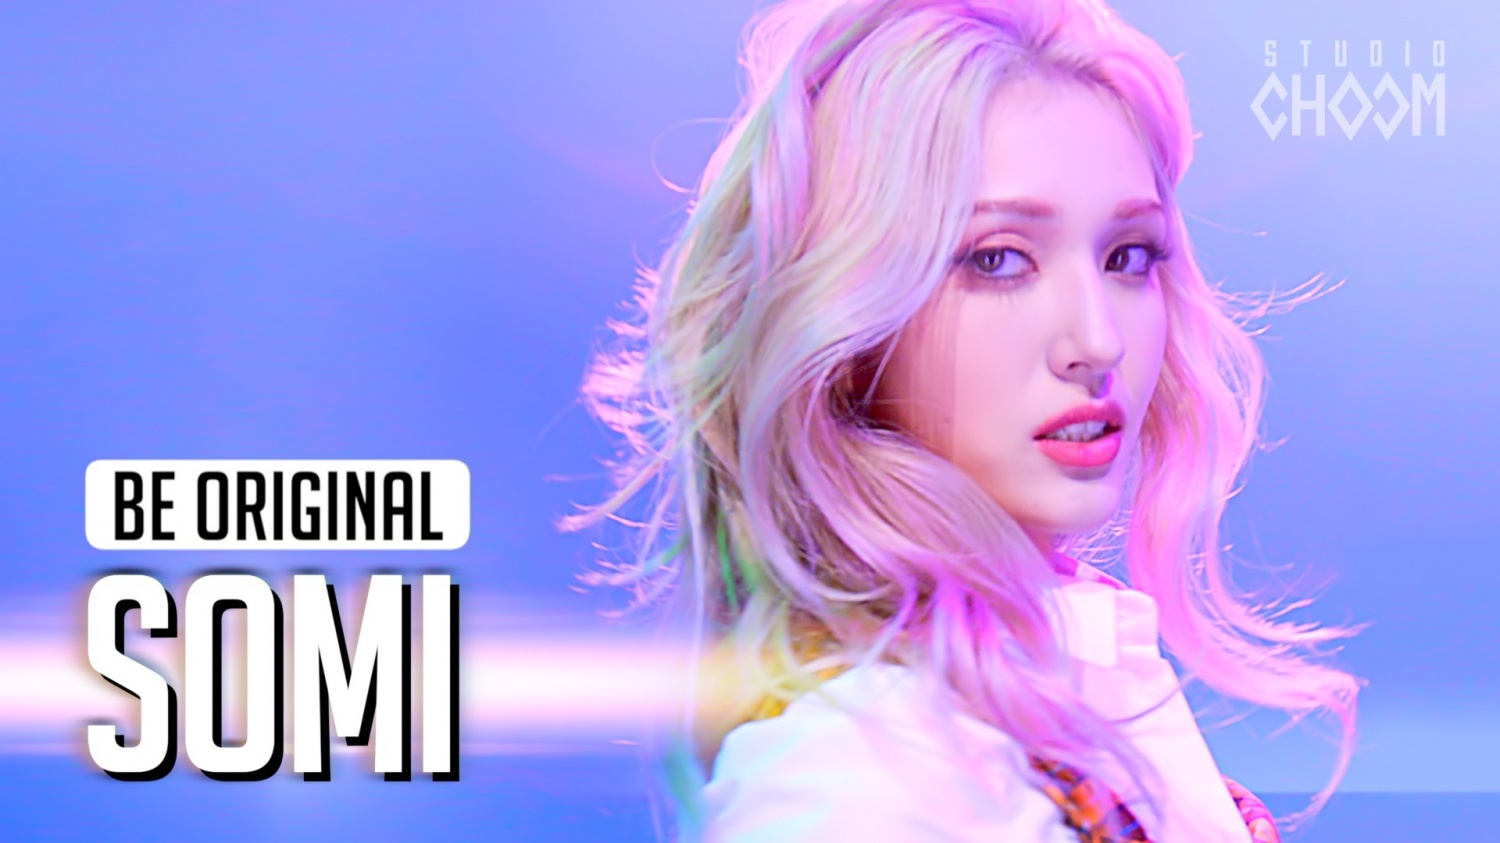 Jeon So-mi, new song 'DUMB DUMB' MV surpassed 20 million views in two days... Demonstrating Solo Power